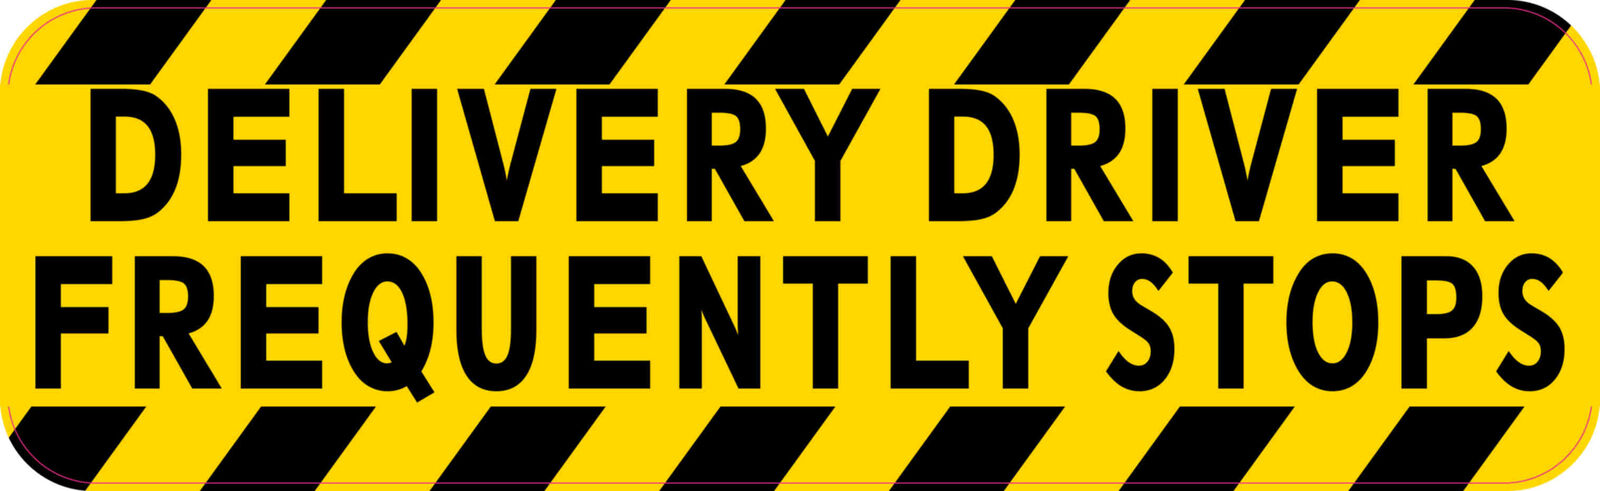 10x3 Delivery Driver Frequently Stops Bumper Sticker Vinyl Window Stickers Sign